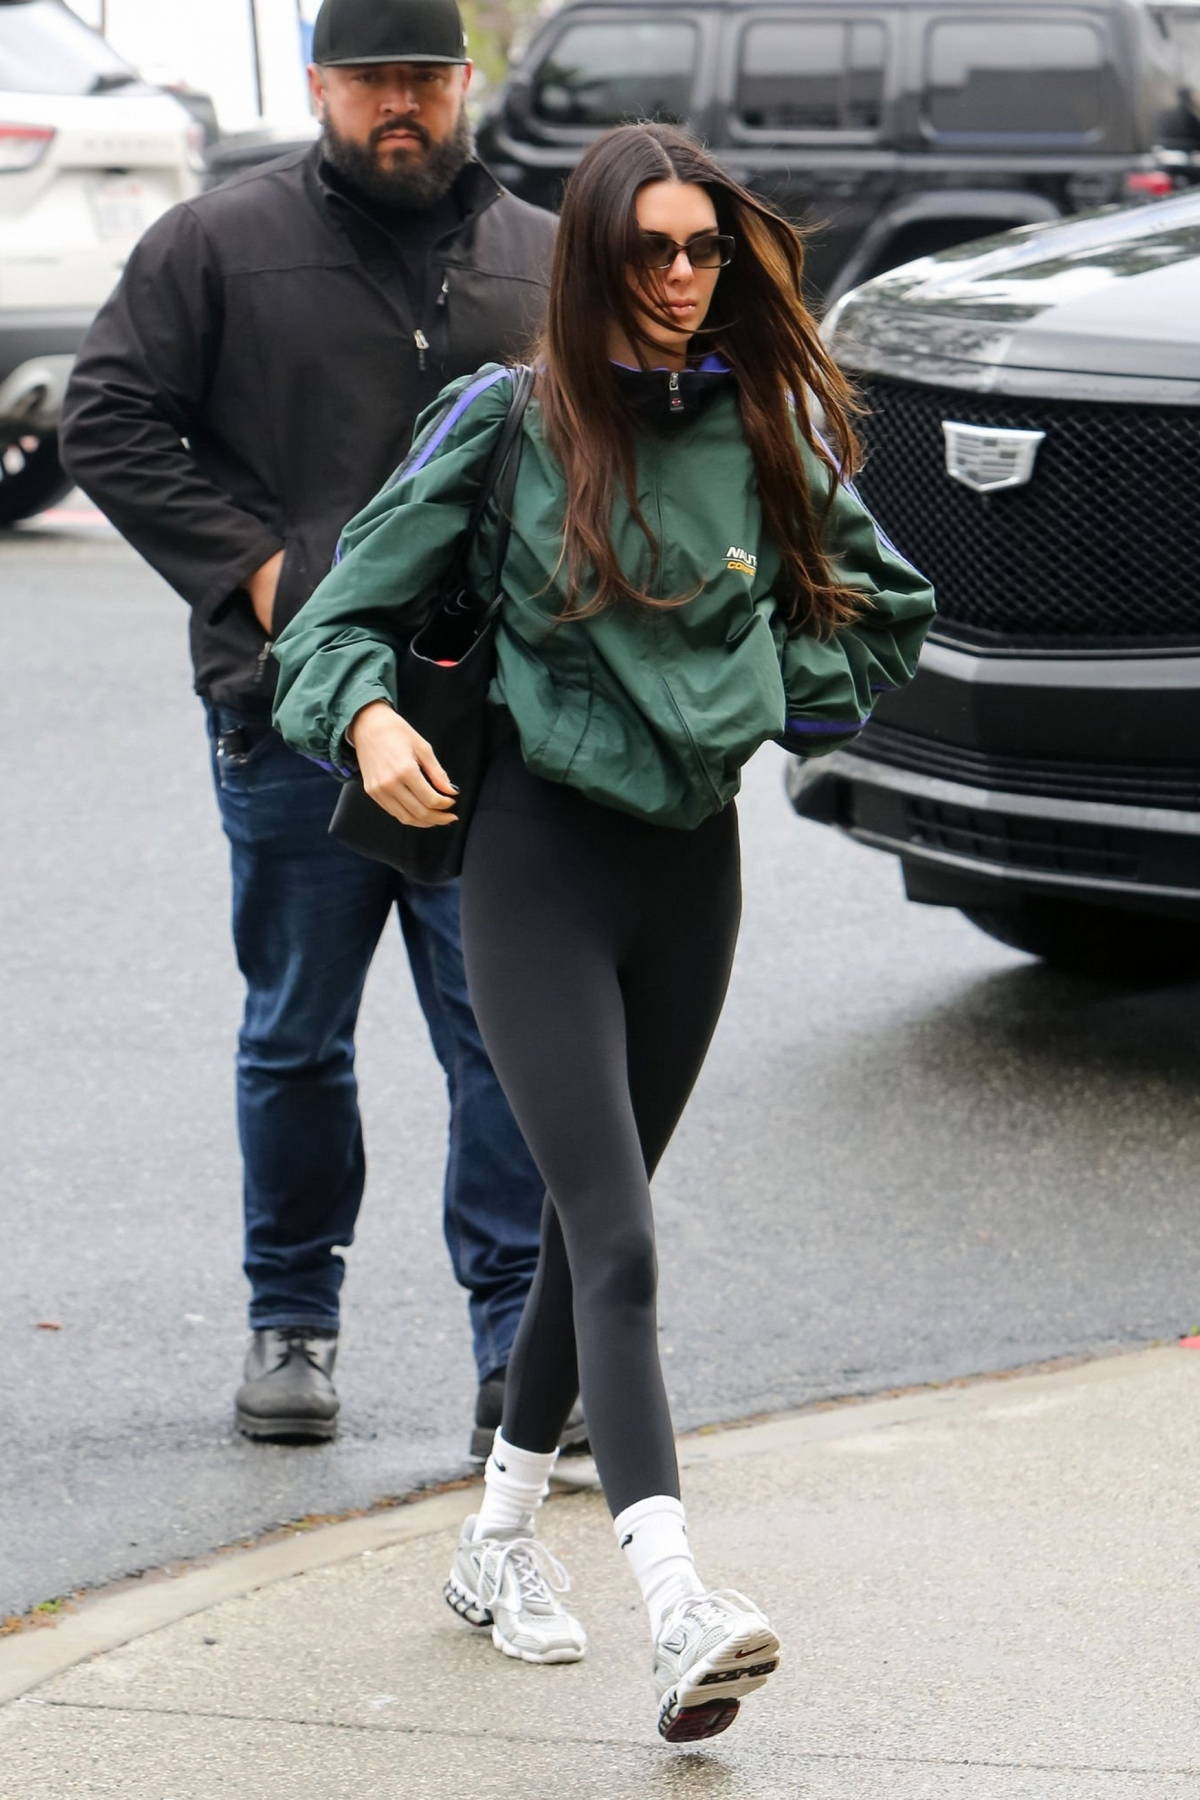 kendall jenner wears a green nautica jacket and black leggings